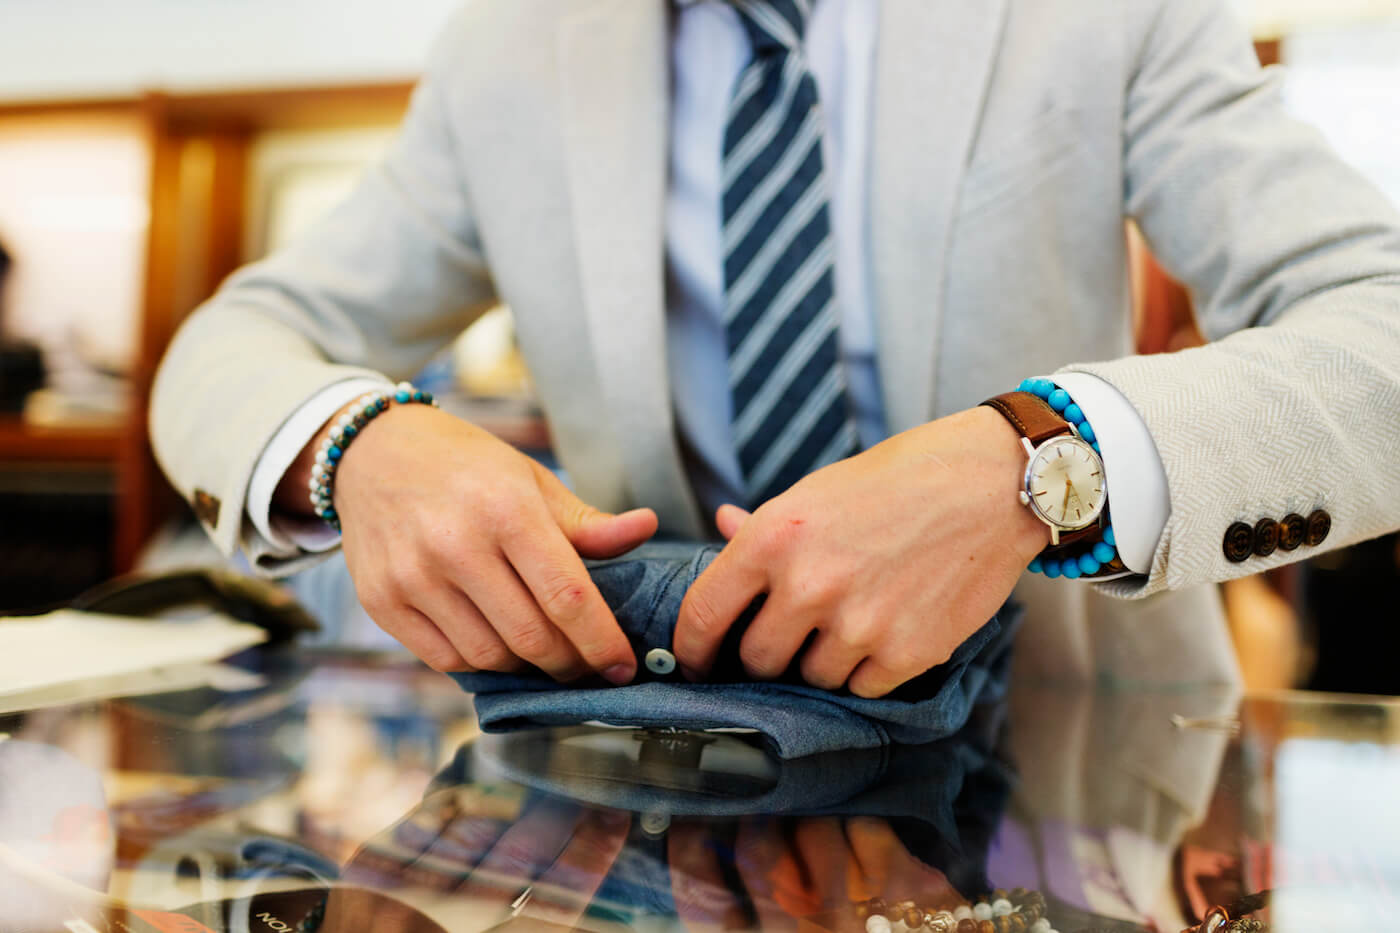 Seller folding dress shirt on table in clothing store